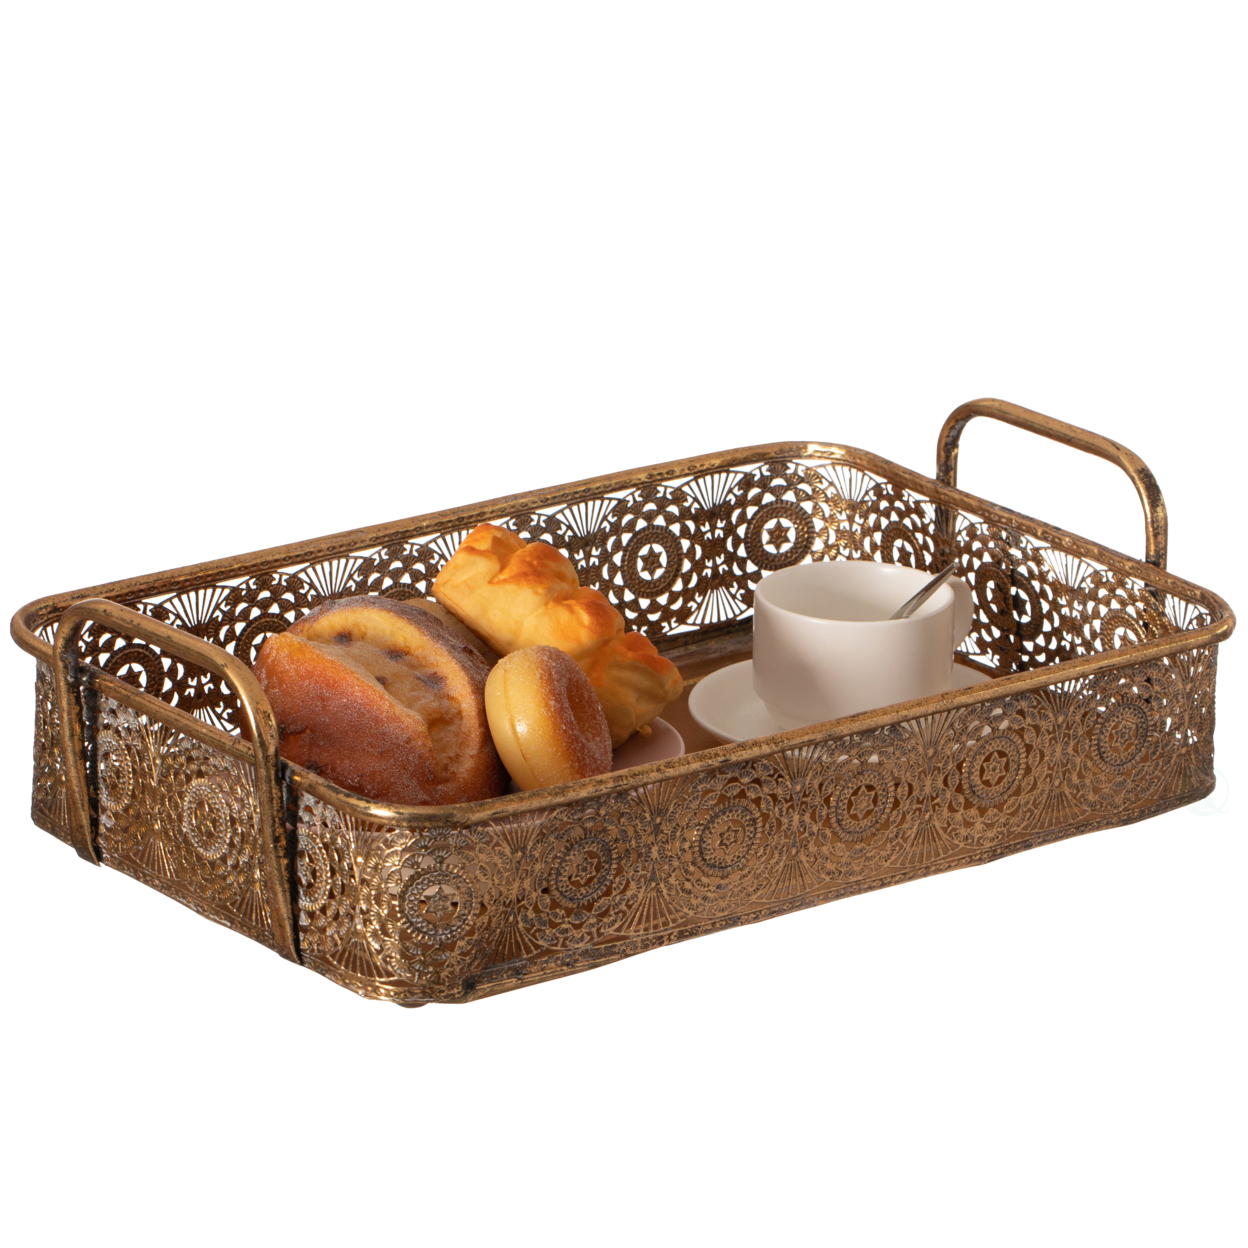 Metal Gold Rectangular Serving Tray With Oval Design And Handles - Large